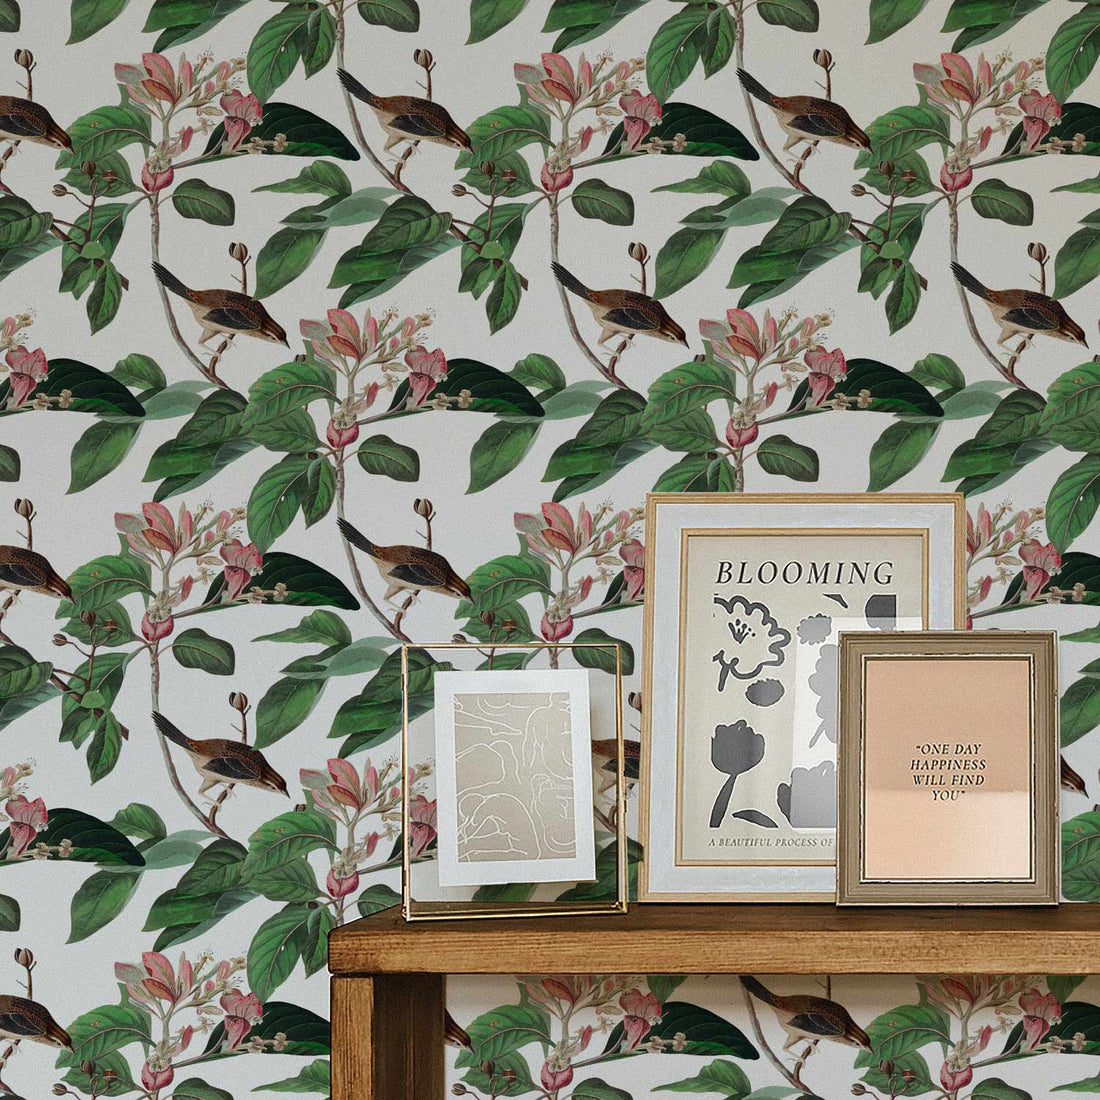 Botanical garden removable wallpaper with birds and flowers